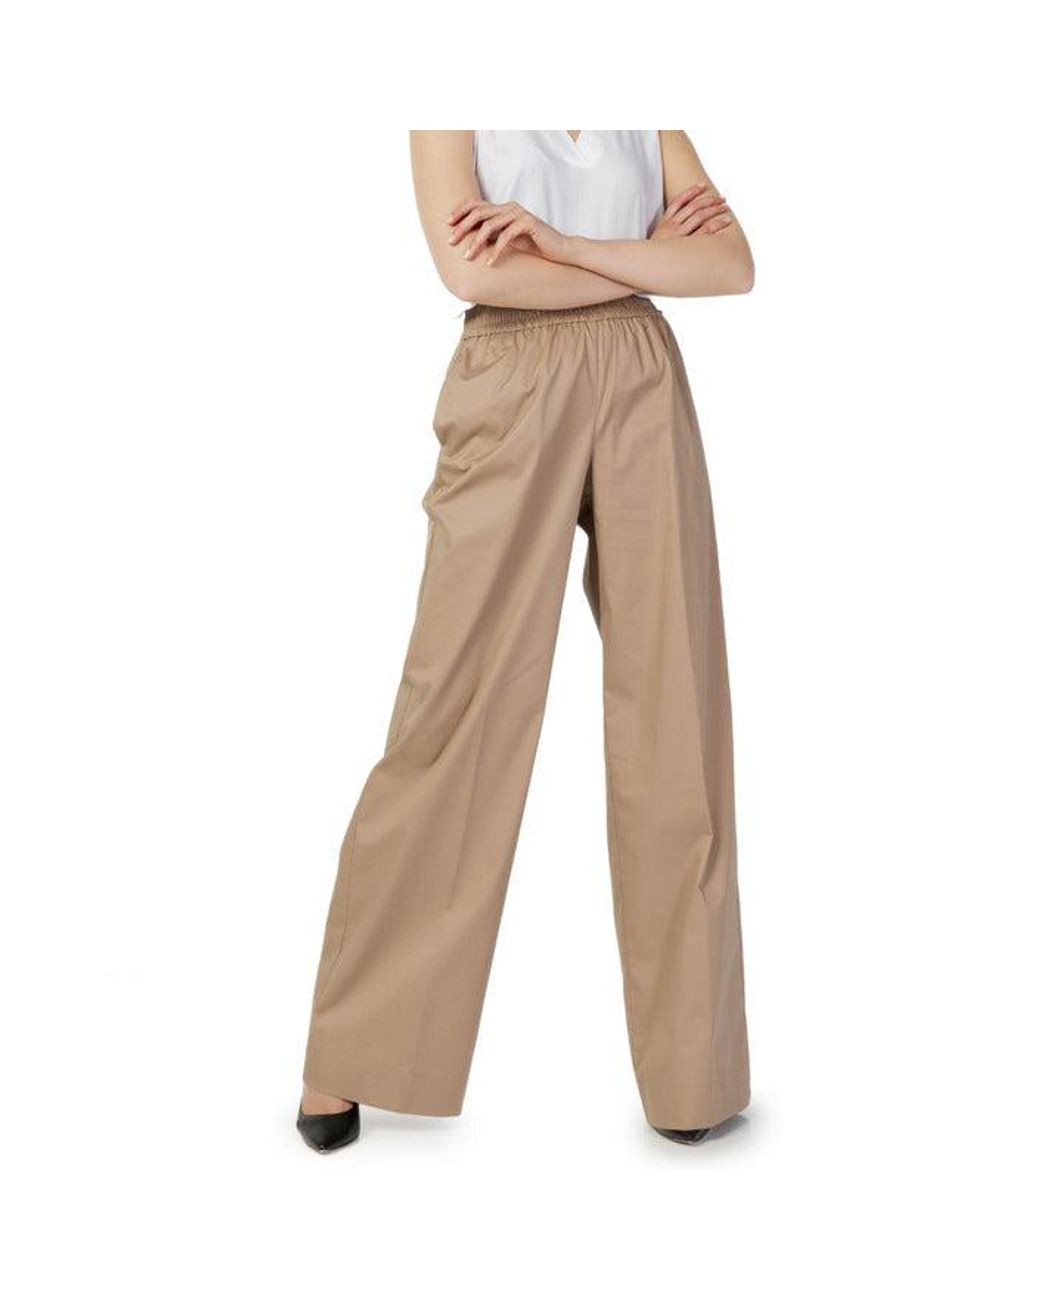 Sandro Ferrone Cotton Trousers in Beige (Natural) | Lyst